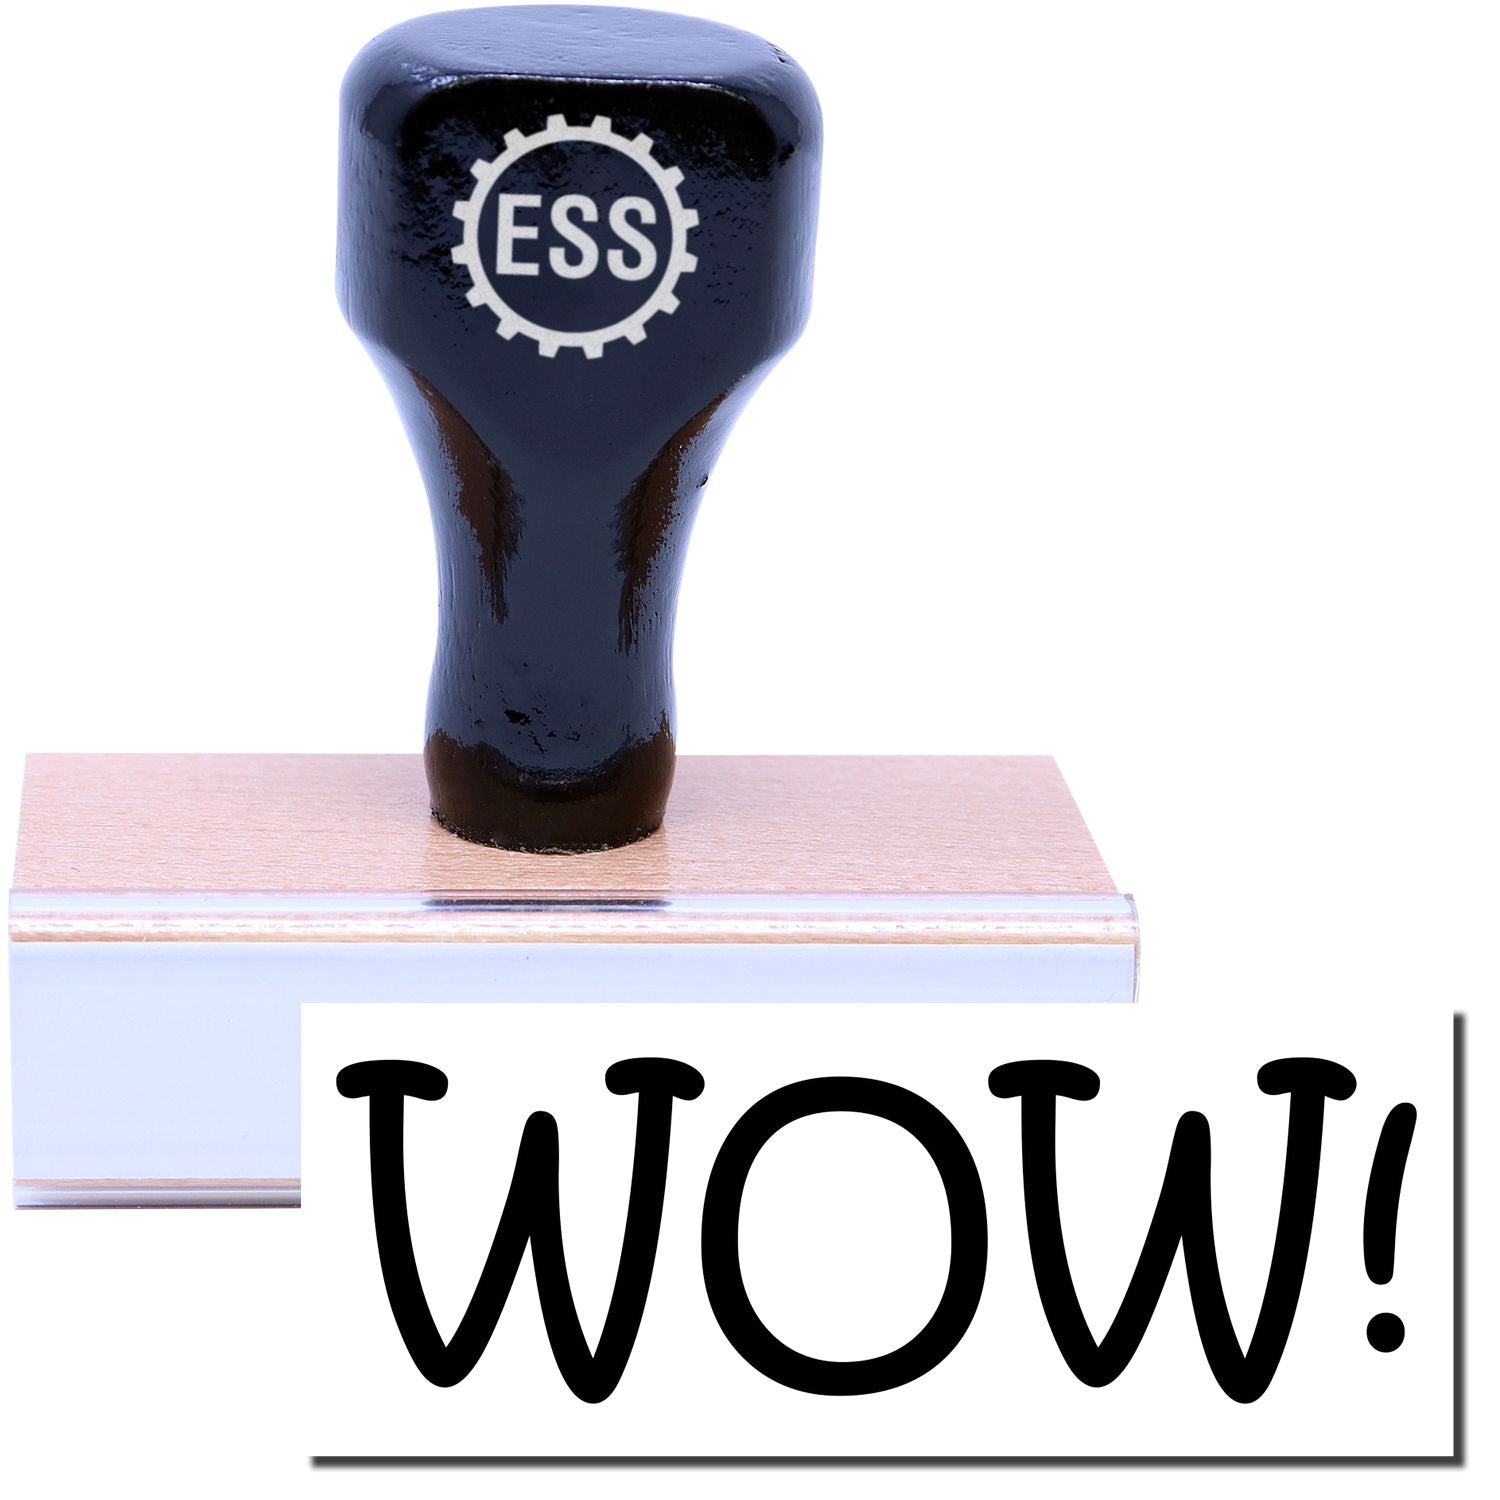 A stock office rubber stamp with a stamped image showing how the text "WOW!" in a large font is displayed after stamping.